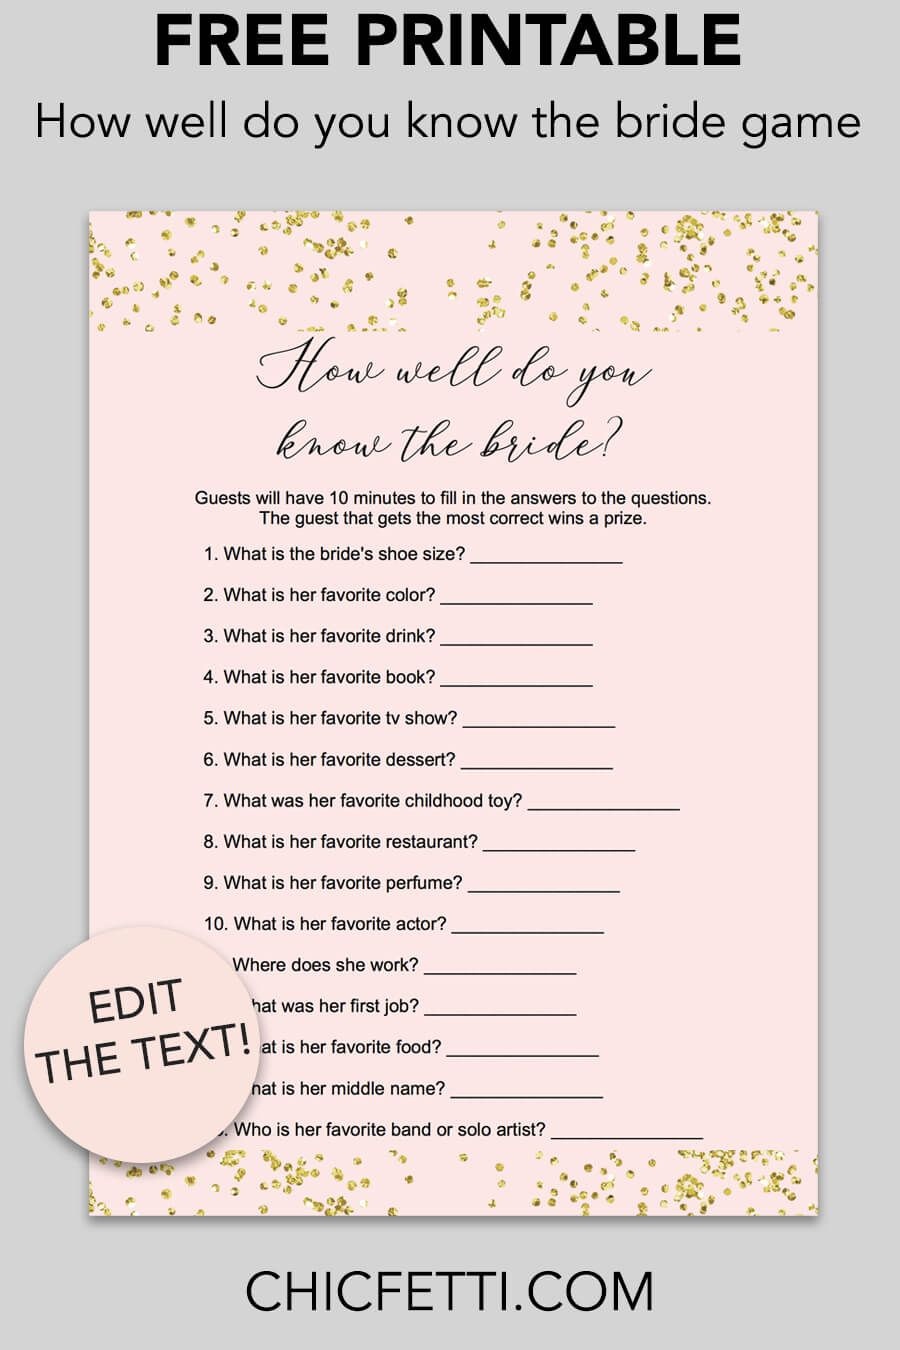 Blush And Confetti How Well Do You Know The Bride Game | Free - How Well Do You Know The Bride Free Printable